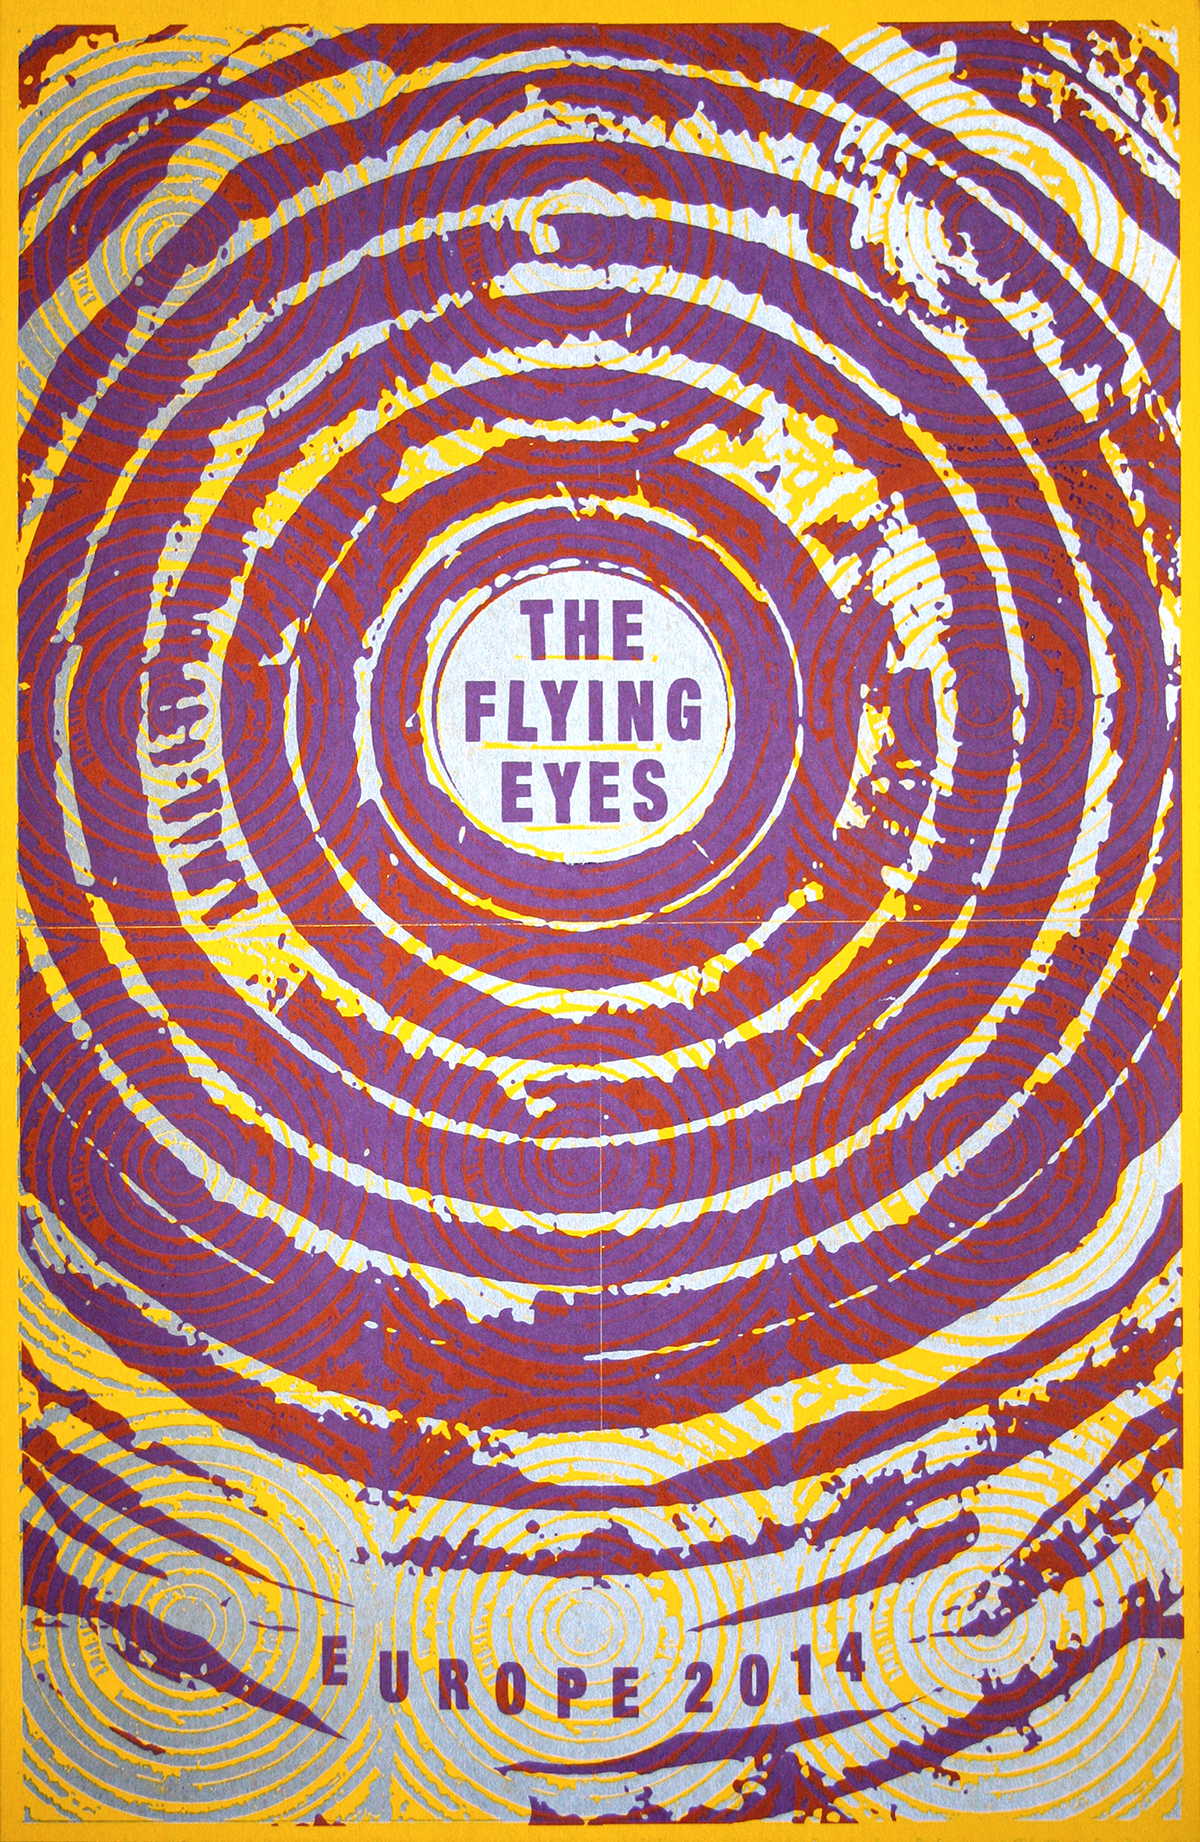 THE FLYING EYES by Rainbow Posters